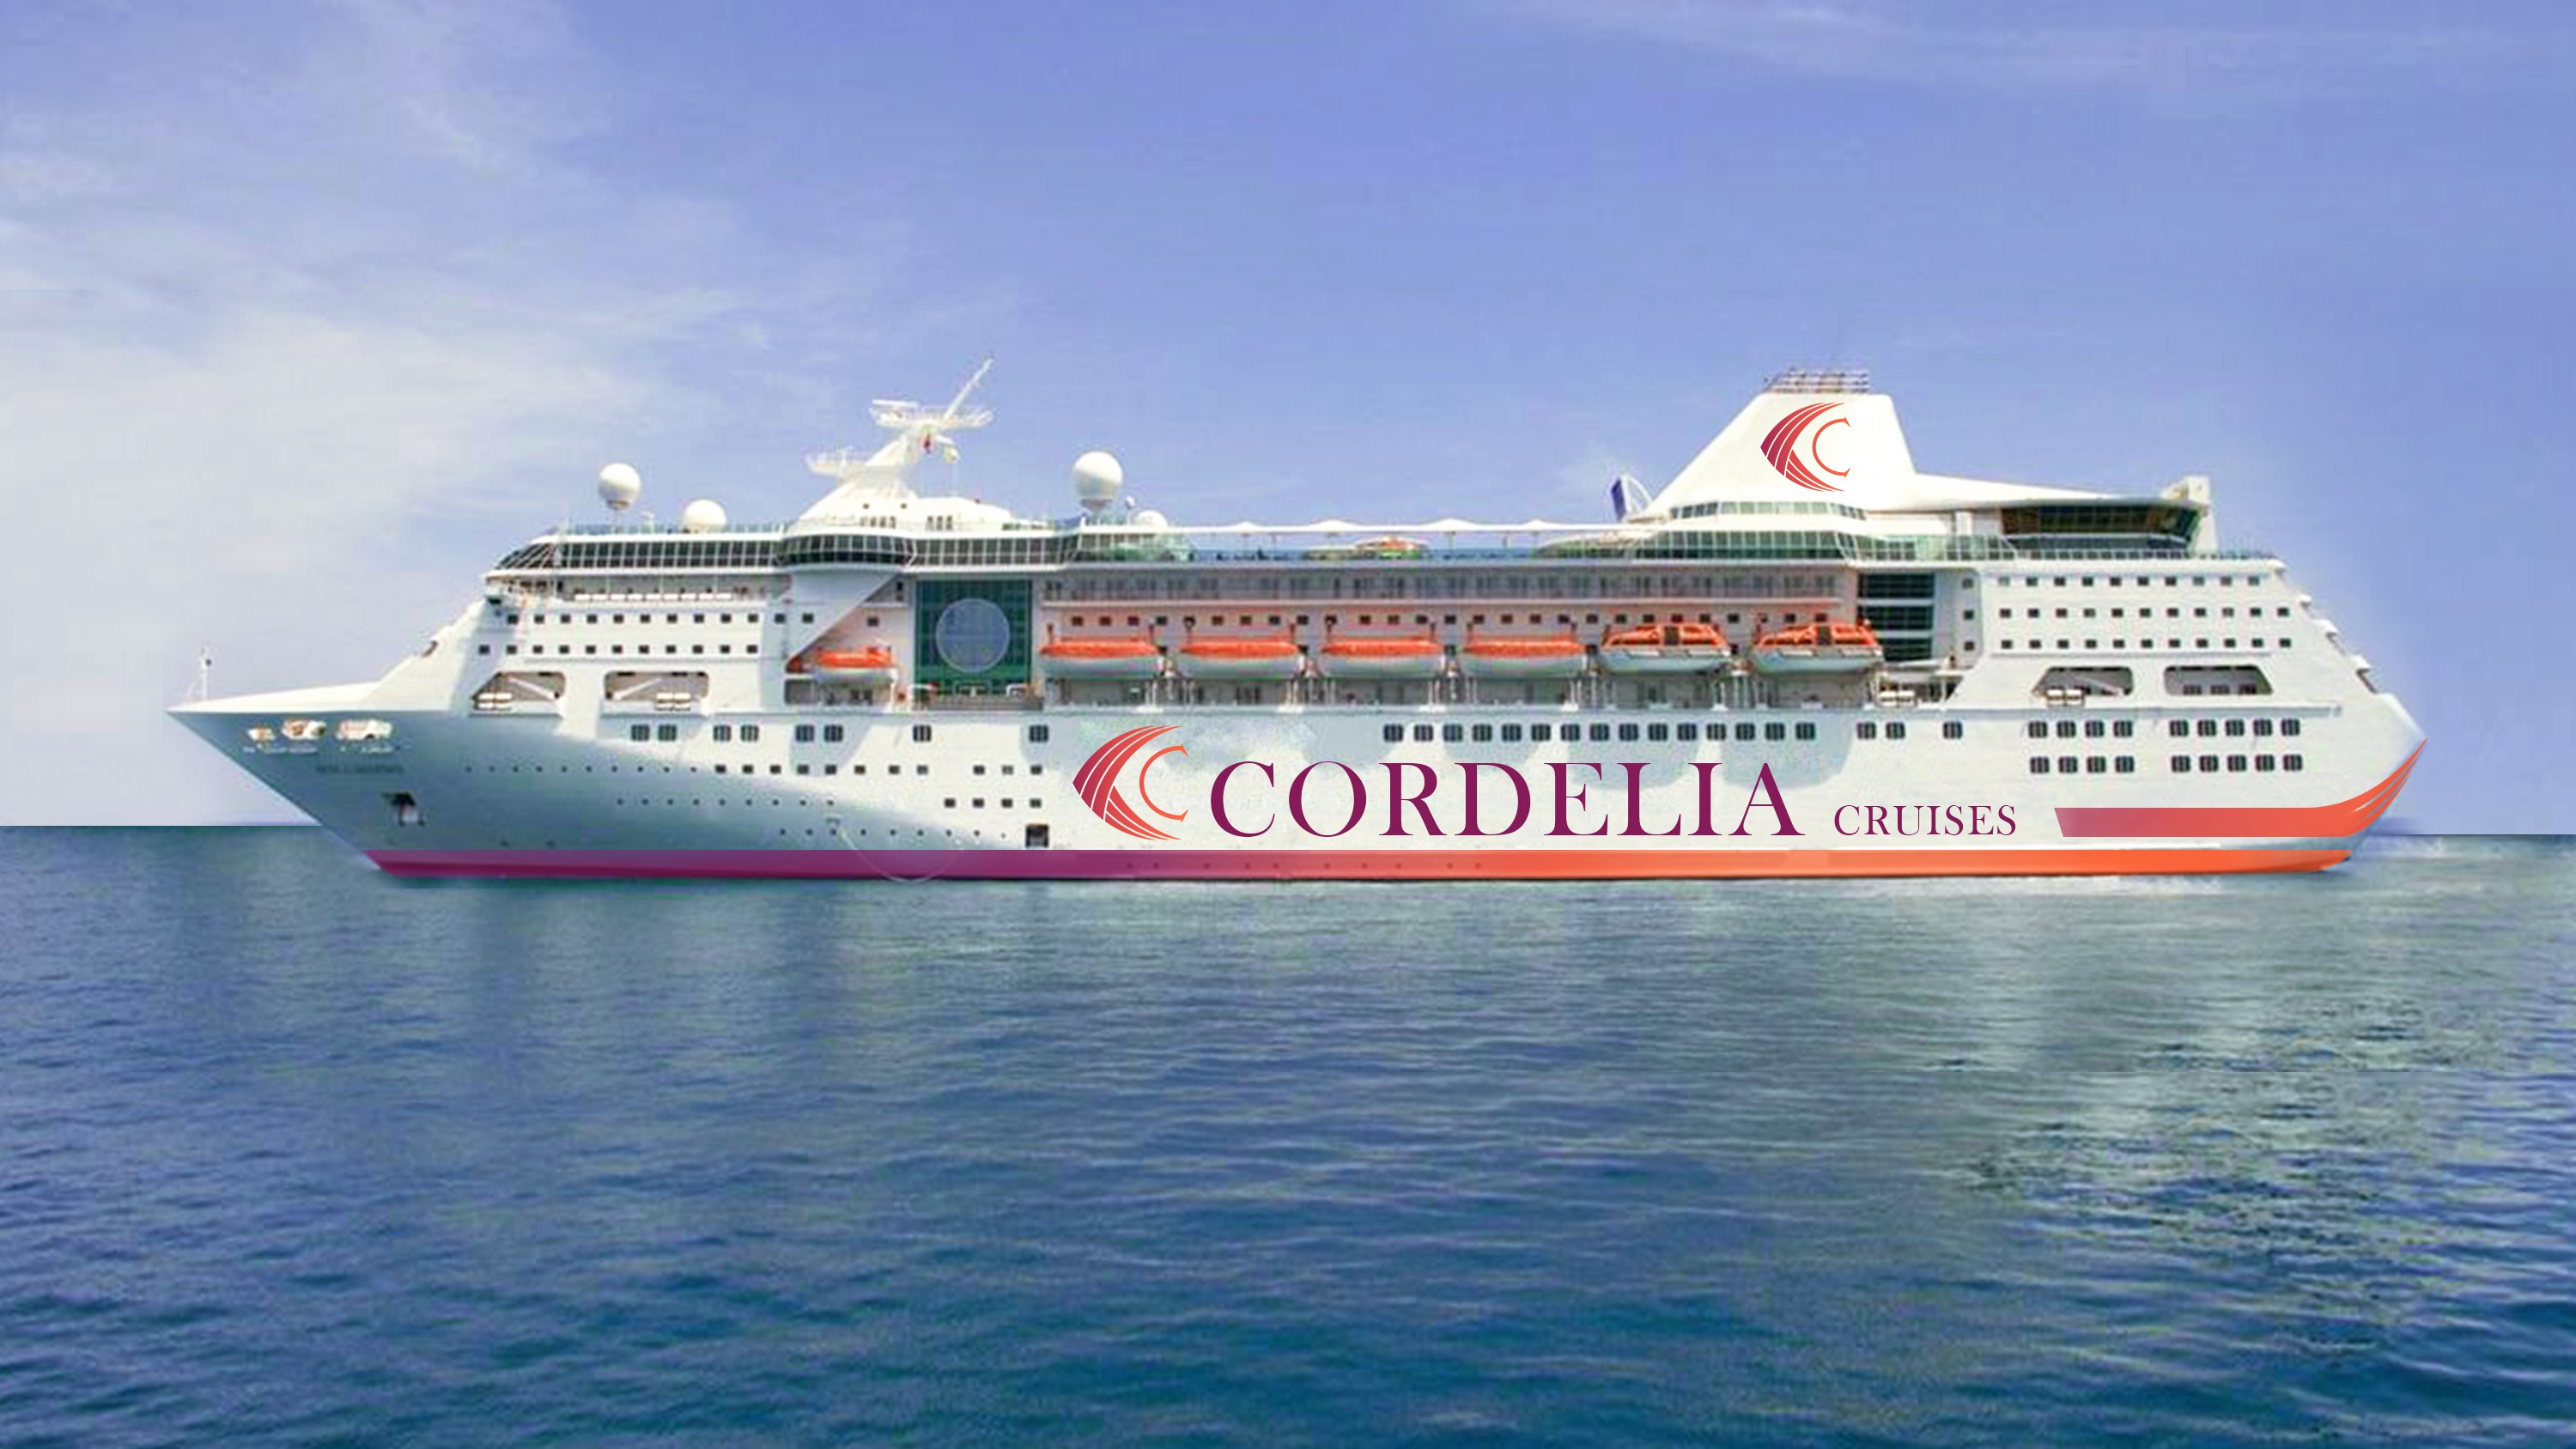 Cordelia Cruises Deck Details Cruise Ship & Spa Packages In India